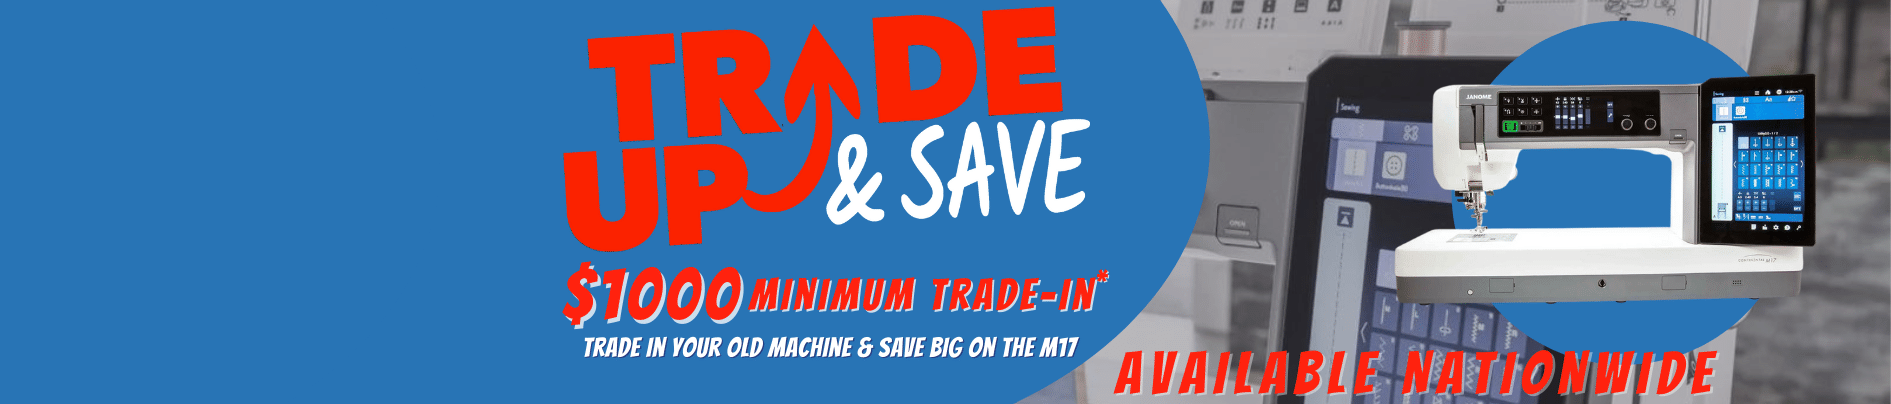 Trade Up and Save on the Janome M17